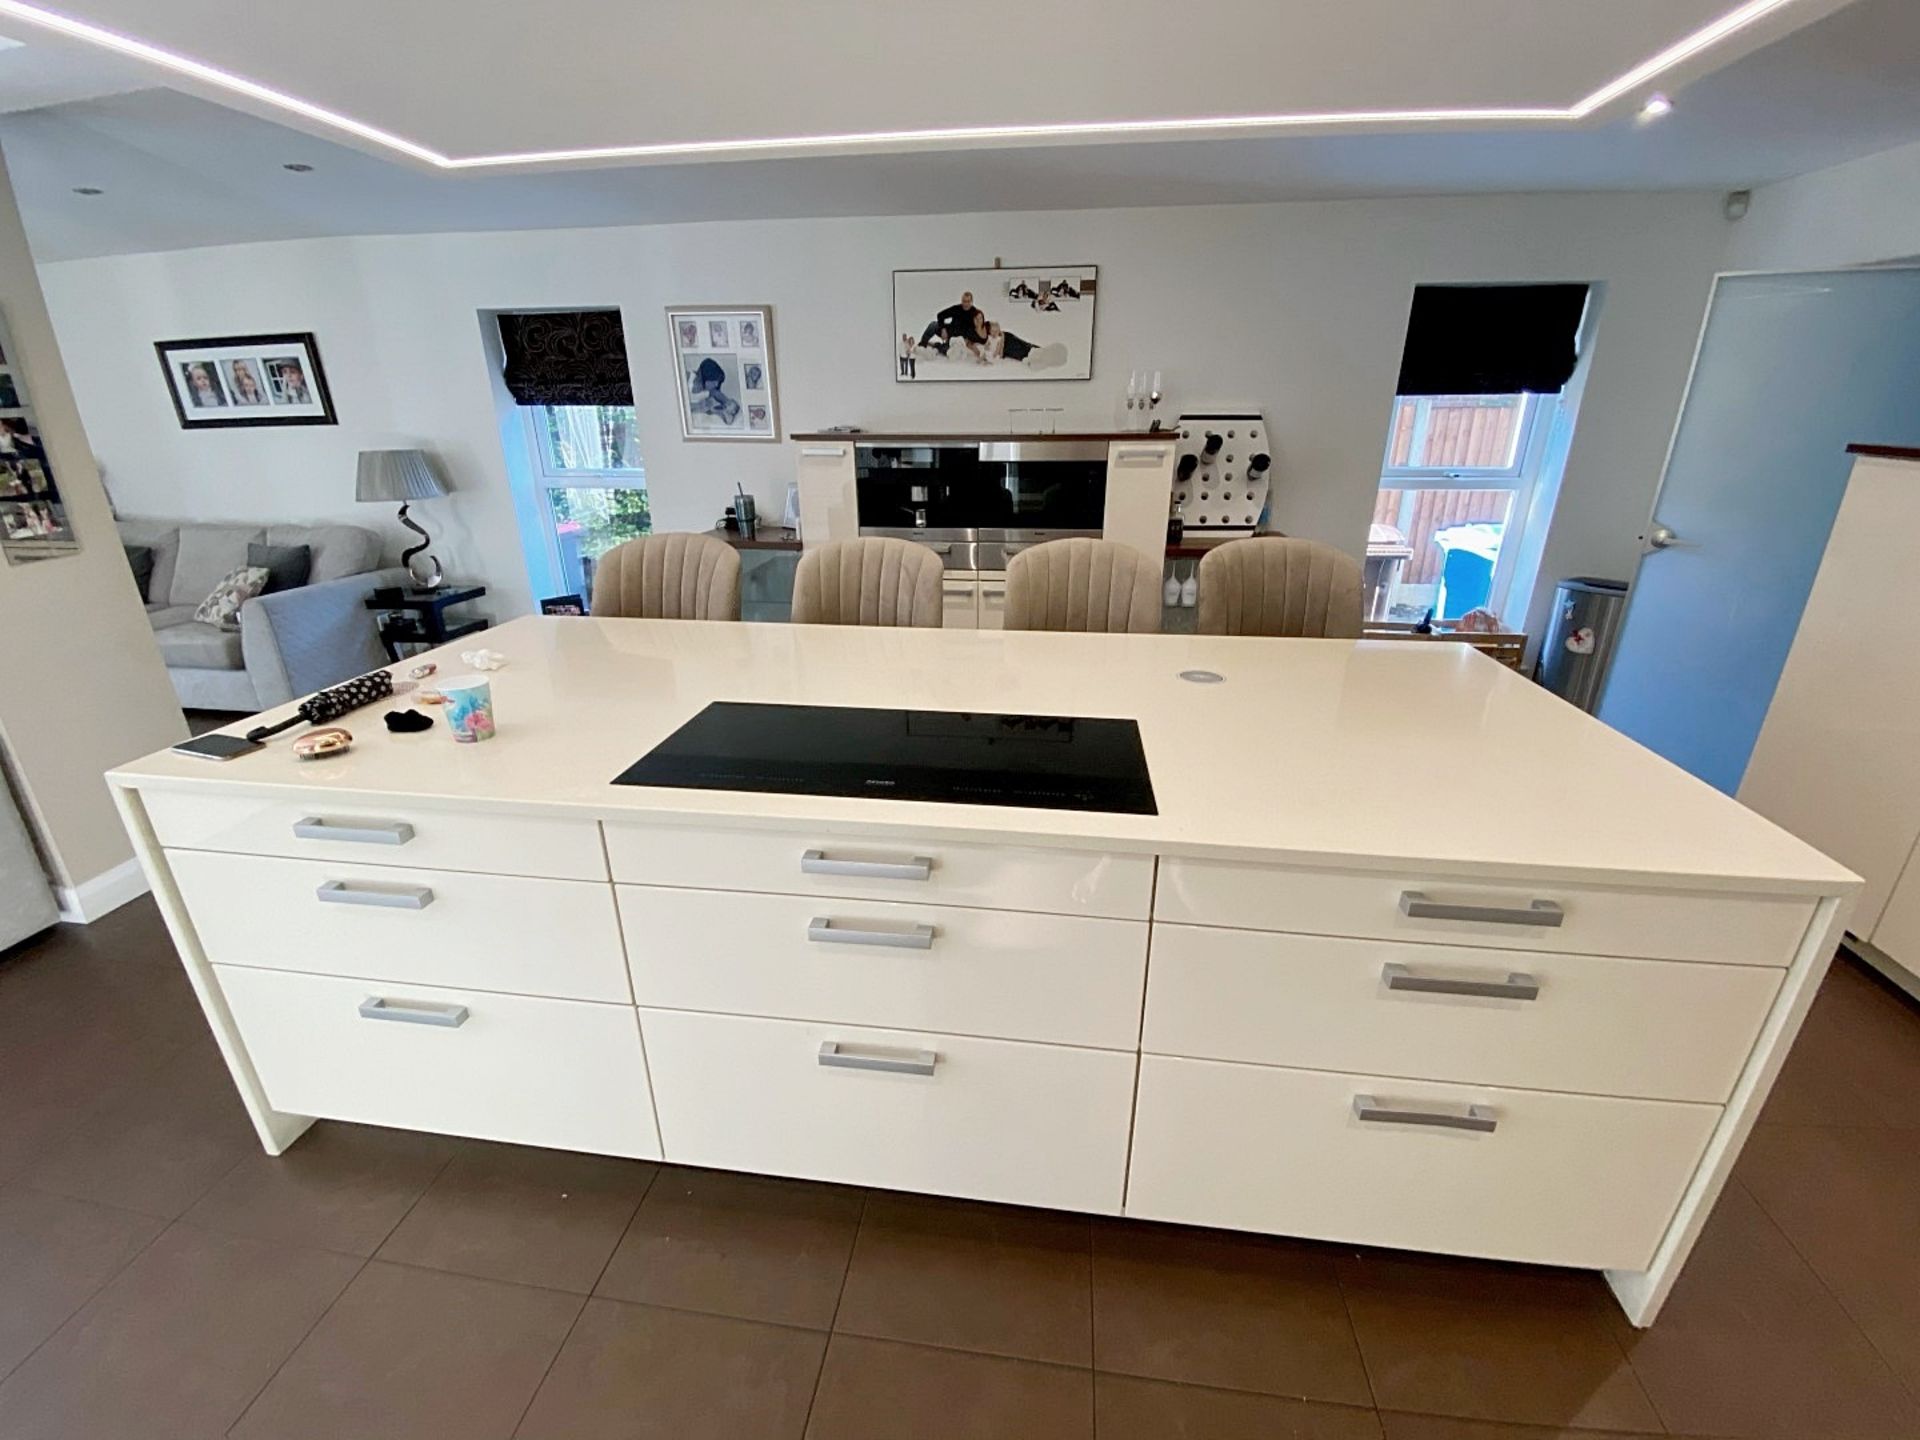 1 x Bespoke Luxury ALNO Branded Fitted Kitchen With Miele Appliances And Silestone® Central Island - Image 9 of 10